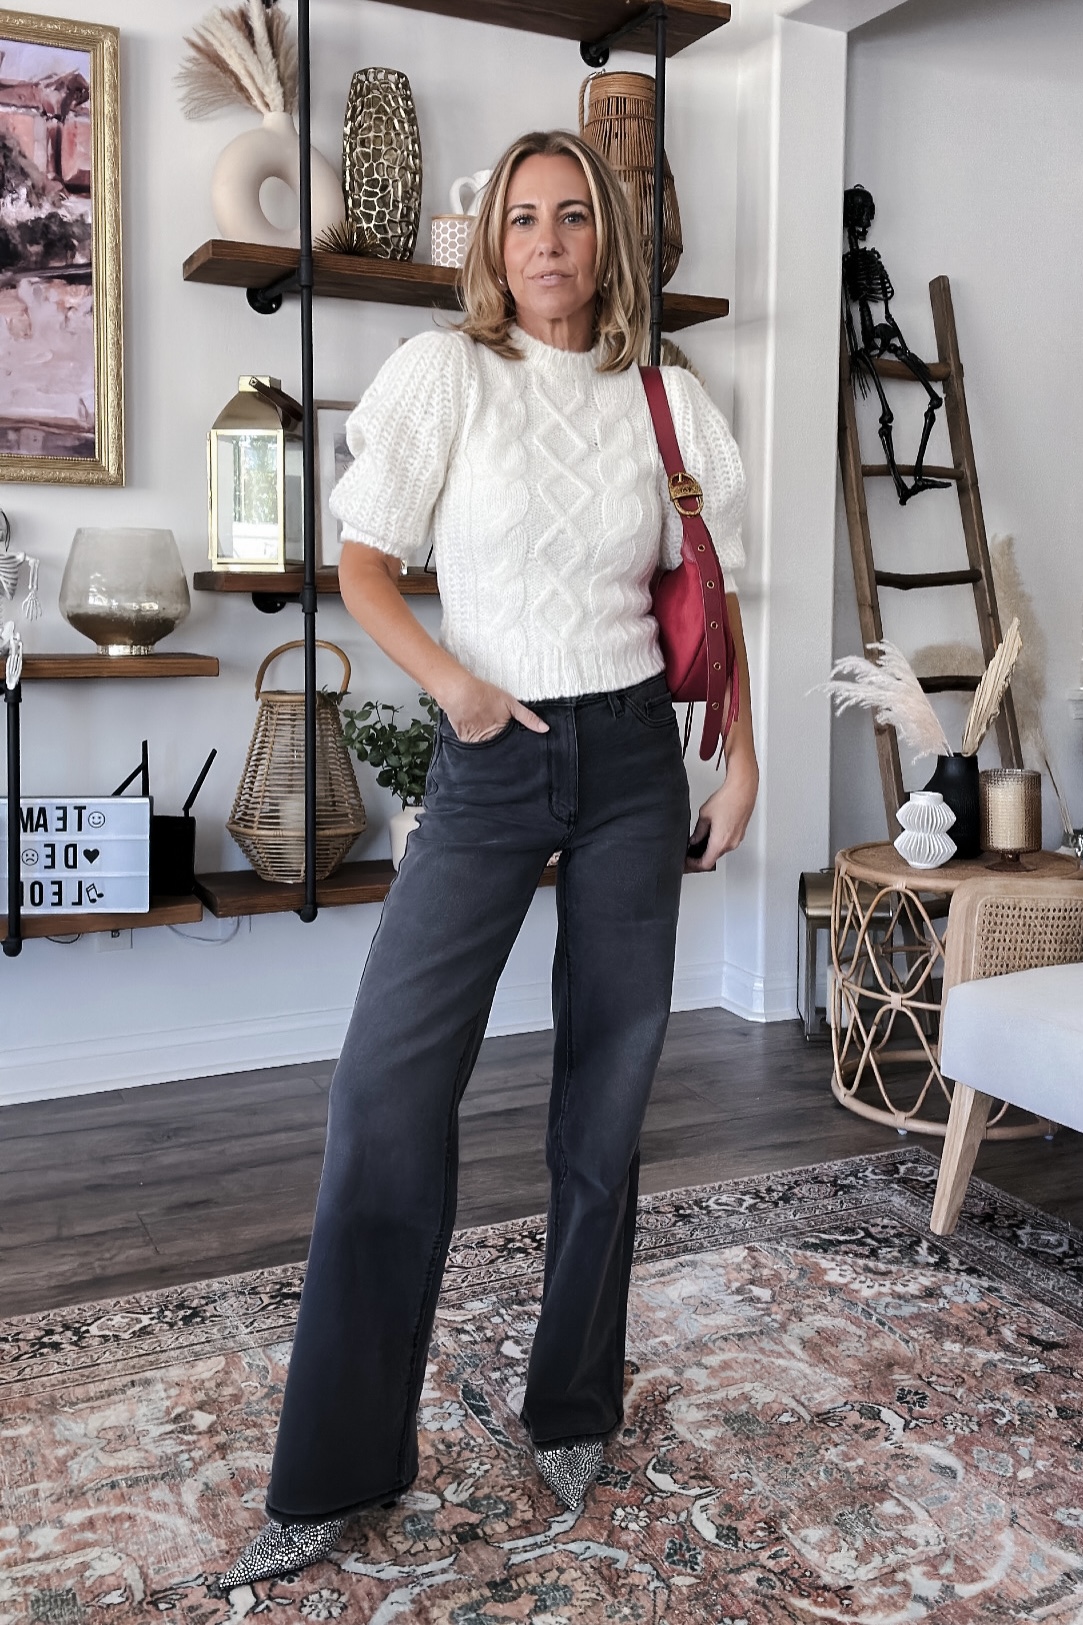 EASY FALL OUTFITS FROM KOHLS-Jaclyn De Leon style. I found some great new items at Kohls. Everything is so affordable and on trend for this fall season.